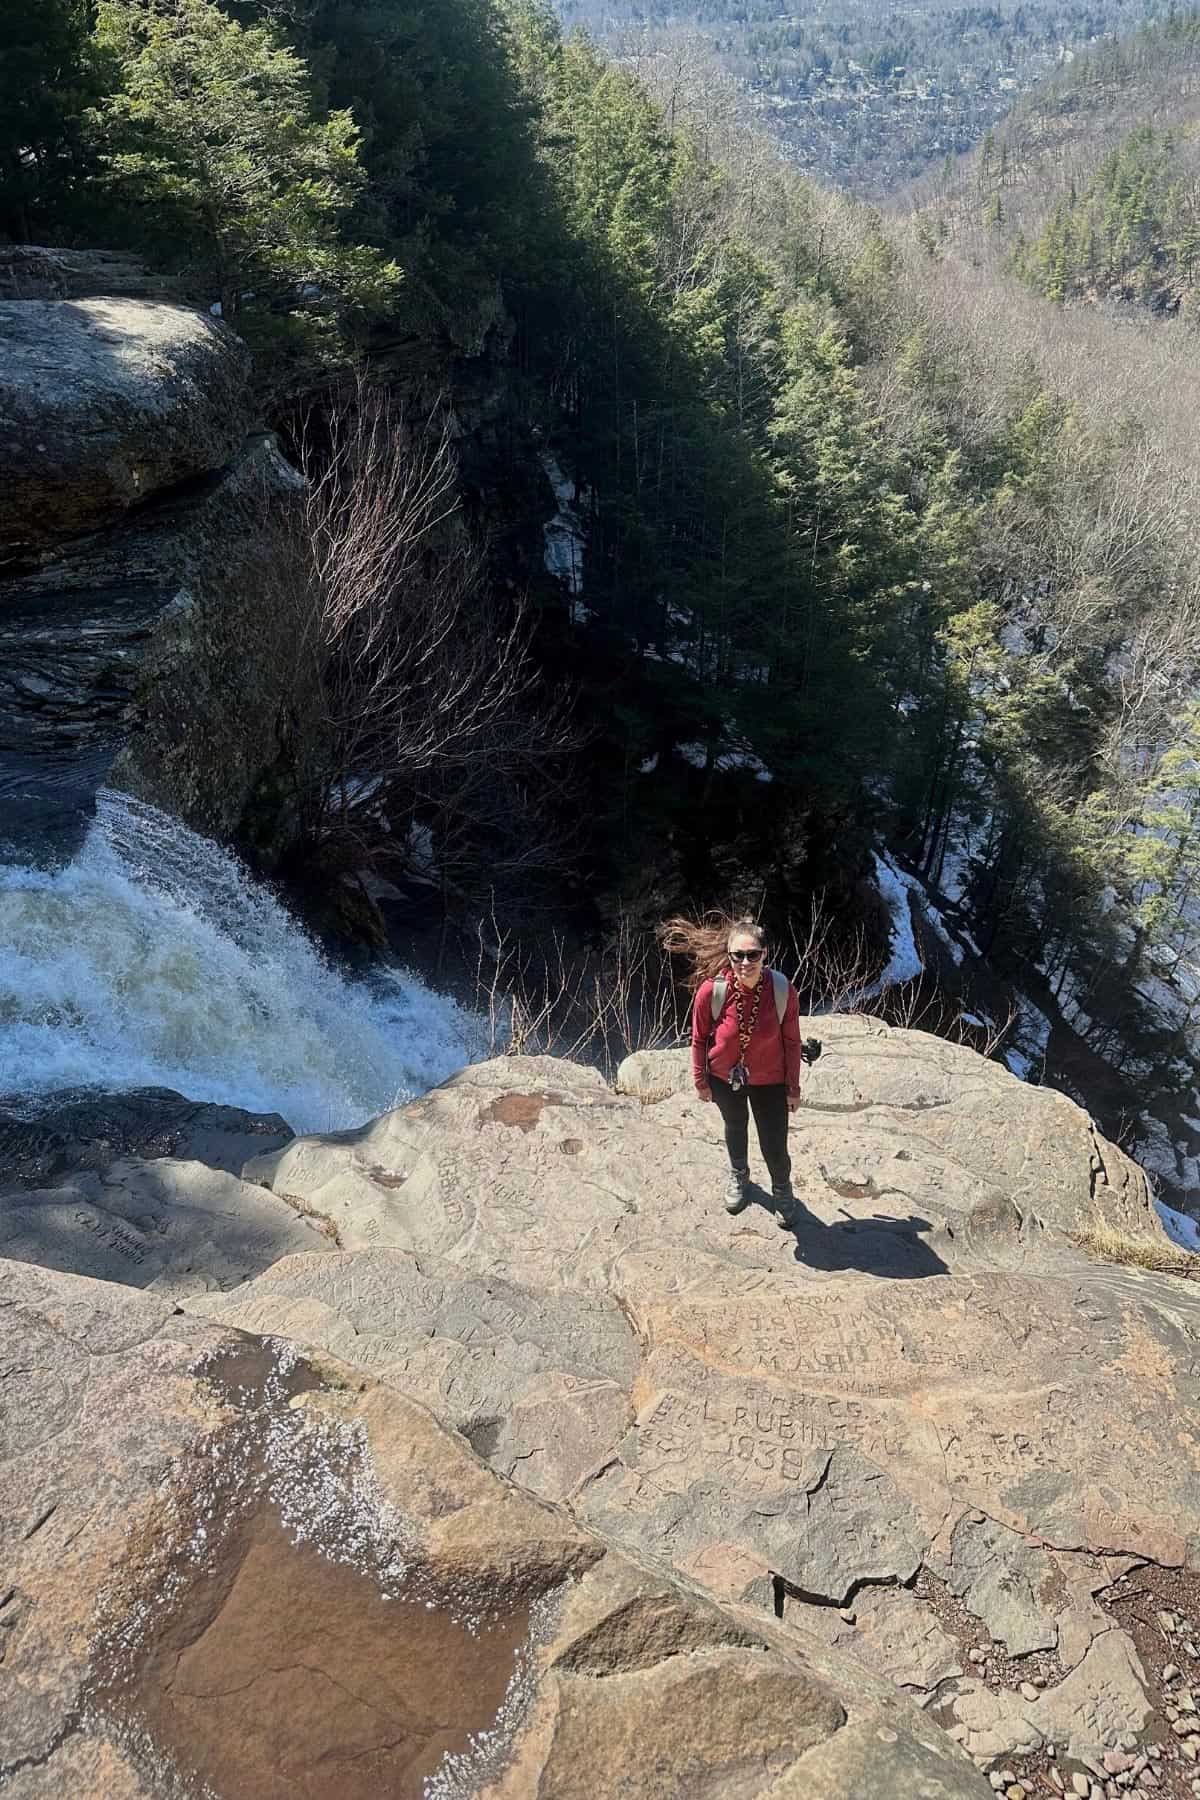 Standing at the top of Kaaterskill Falls.